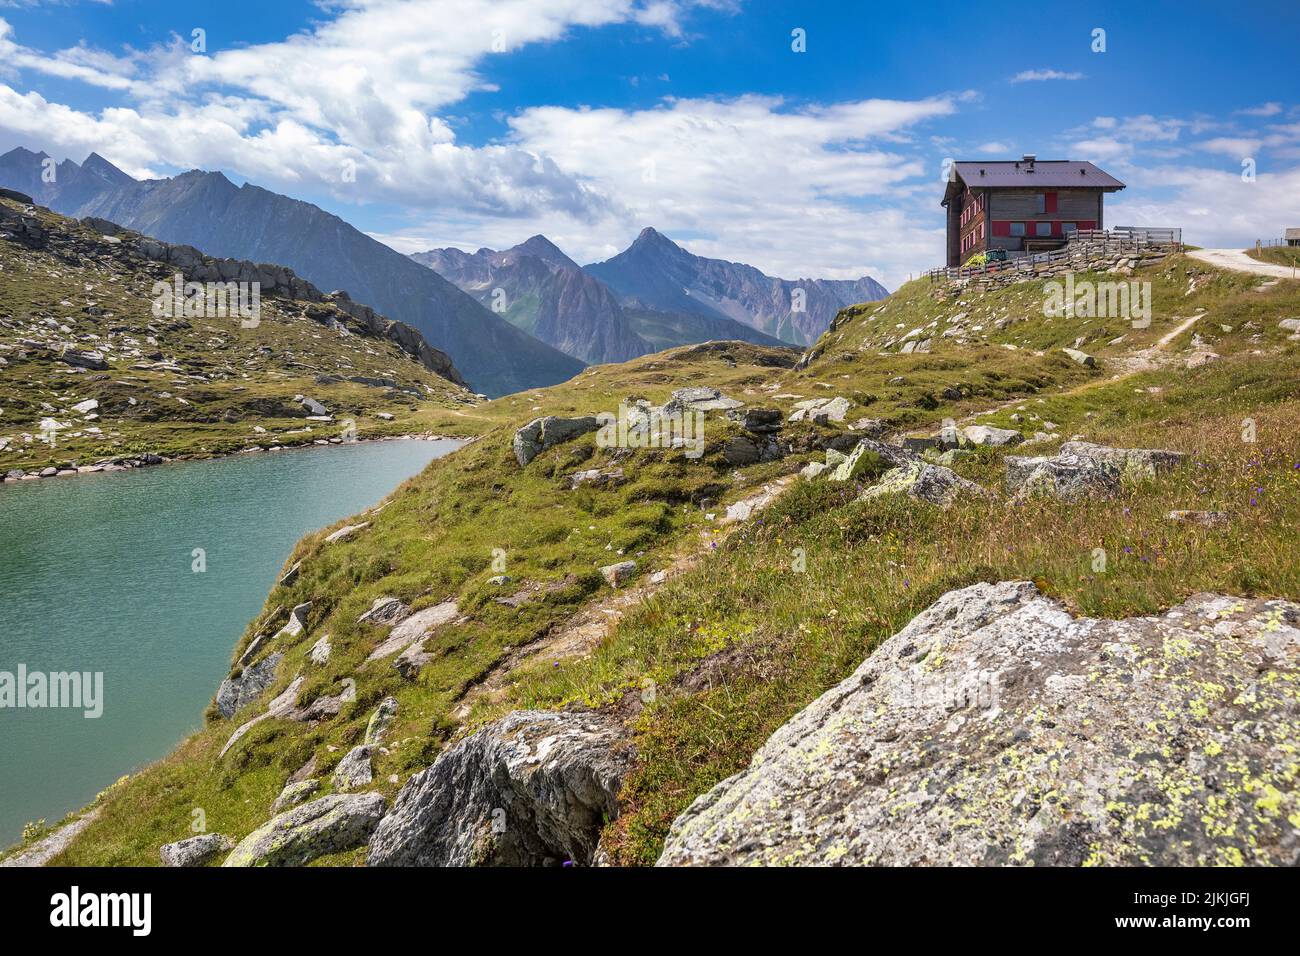 Italy, South Tyrol, Bolzano, val di Vizze / Pfitschtal, passo di Vizze / Pfitscher Joch, the Pfitscherjoch Haus, mountain refuge on the crossing border between Italy and Austria / South Tyrol and Zillertal Stock Photo